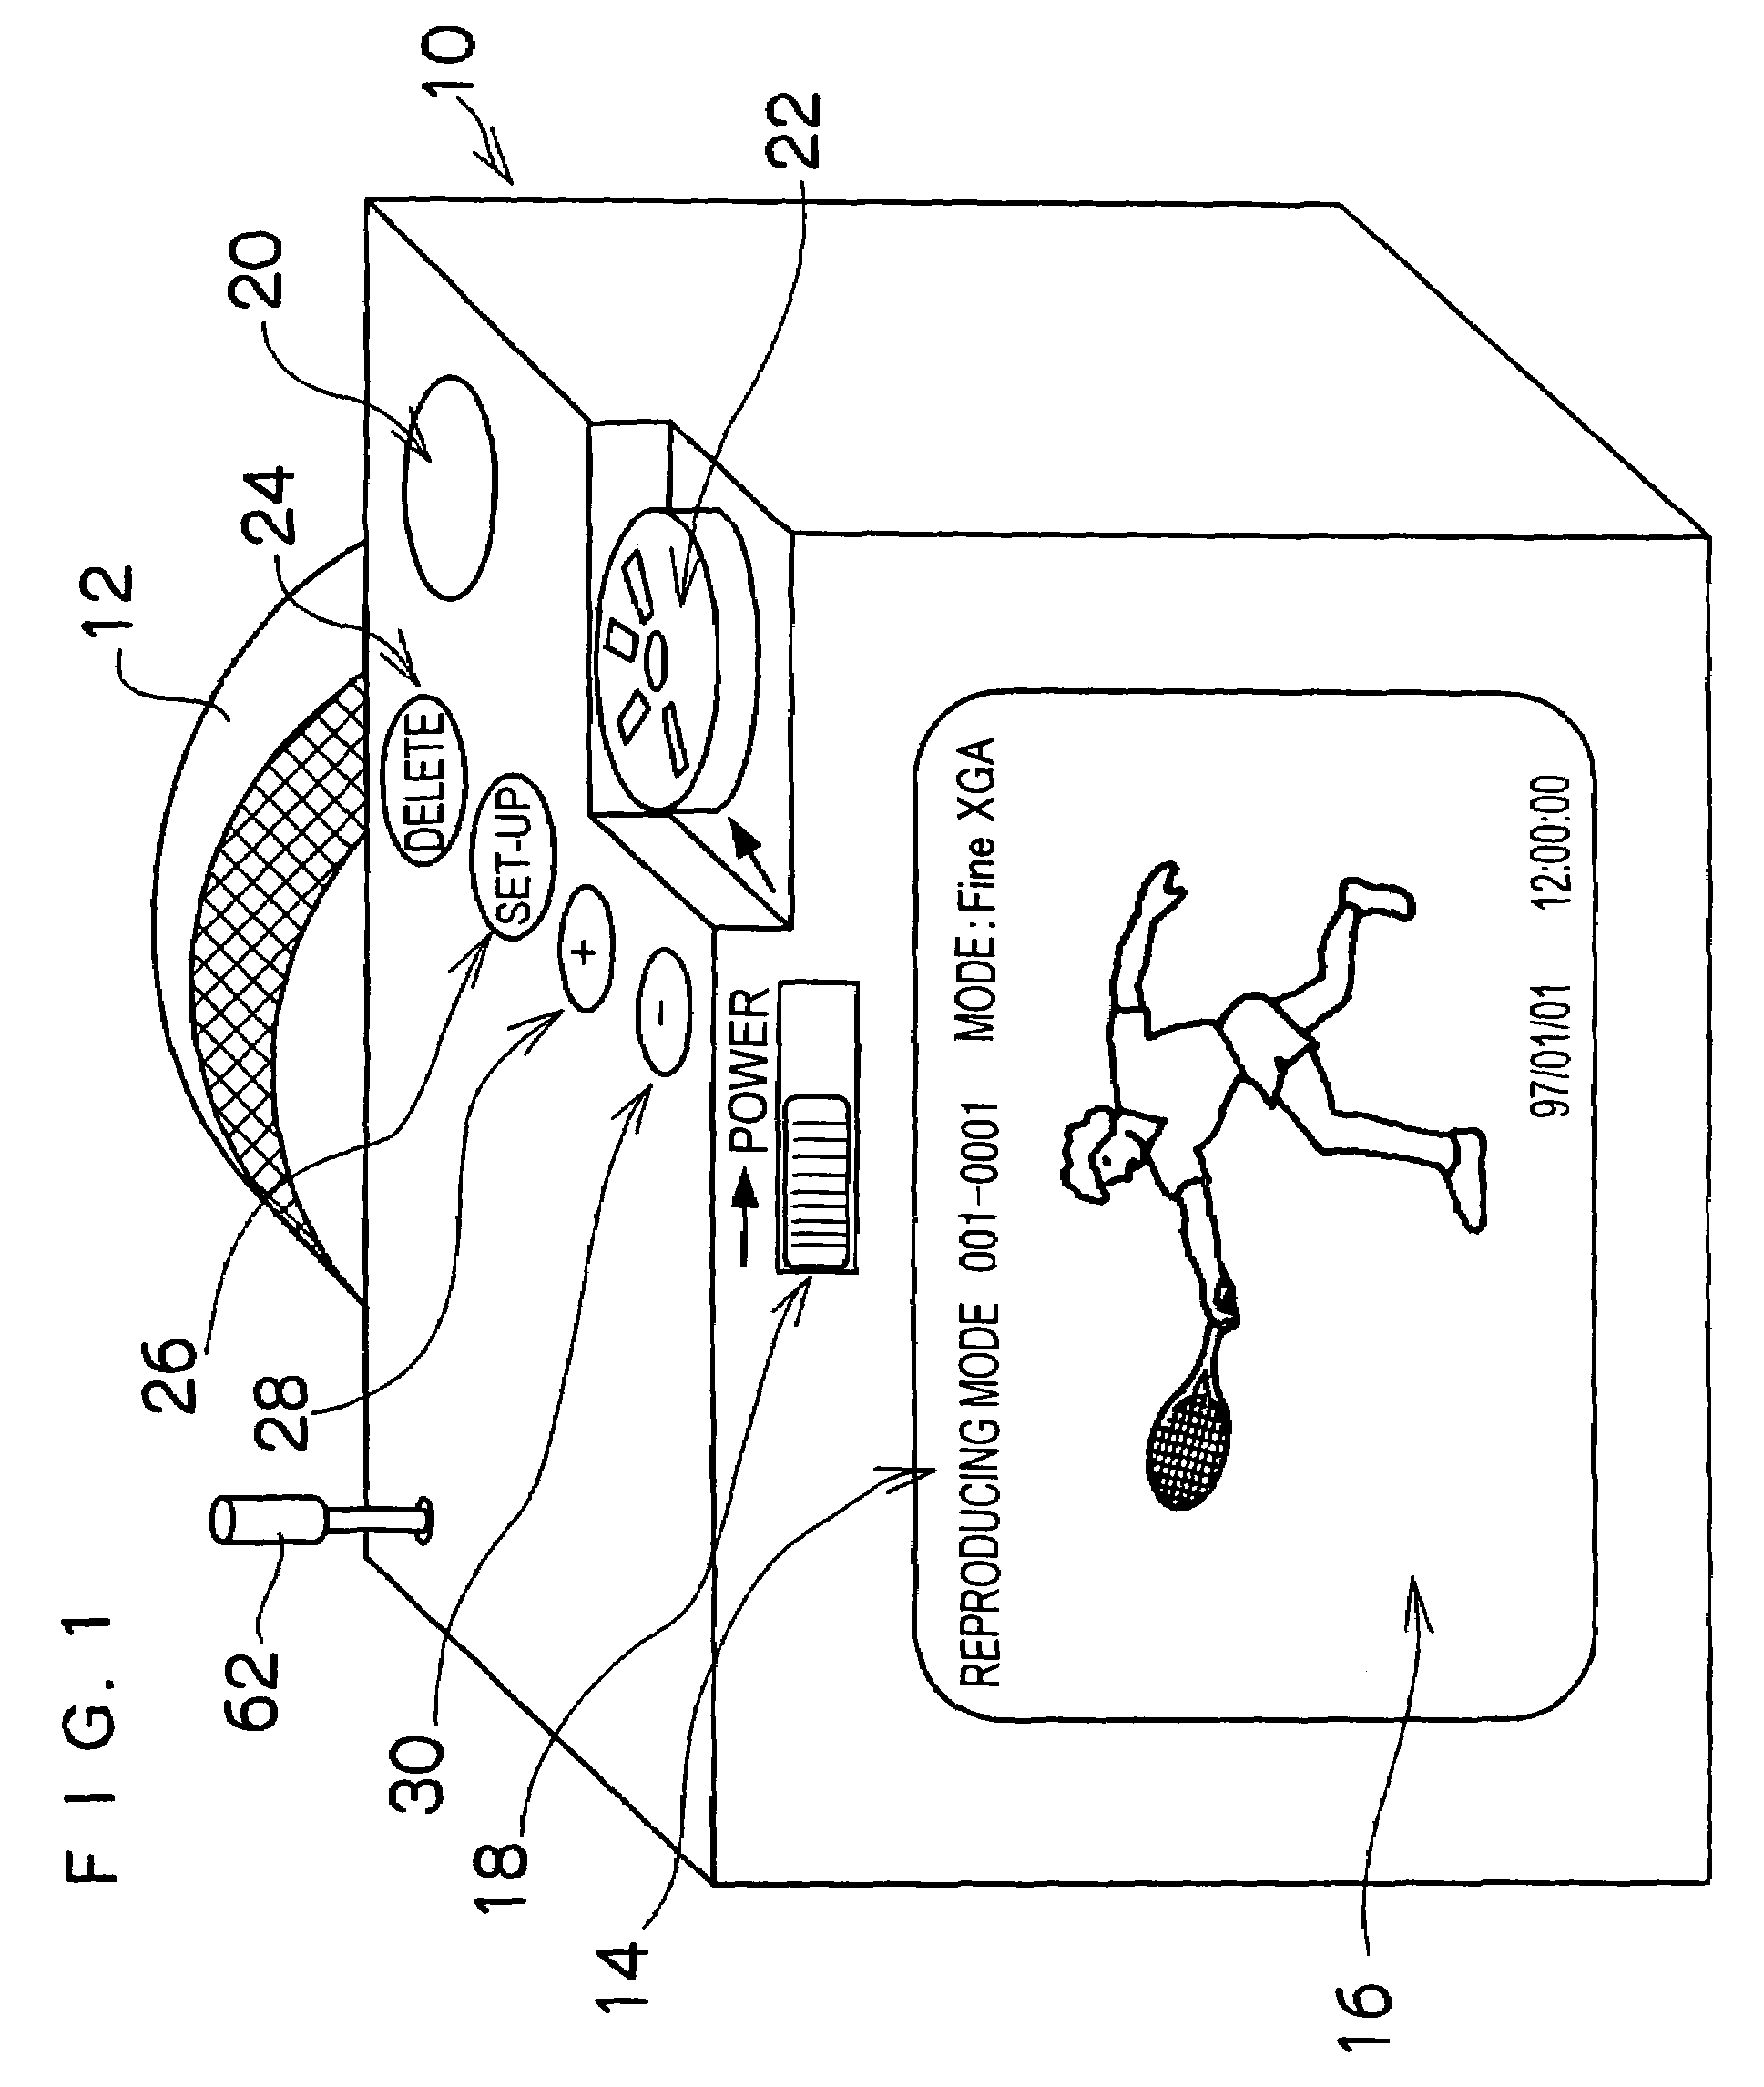 Image pick-up information transmitting system and remote control method for an information transmitting system